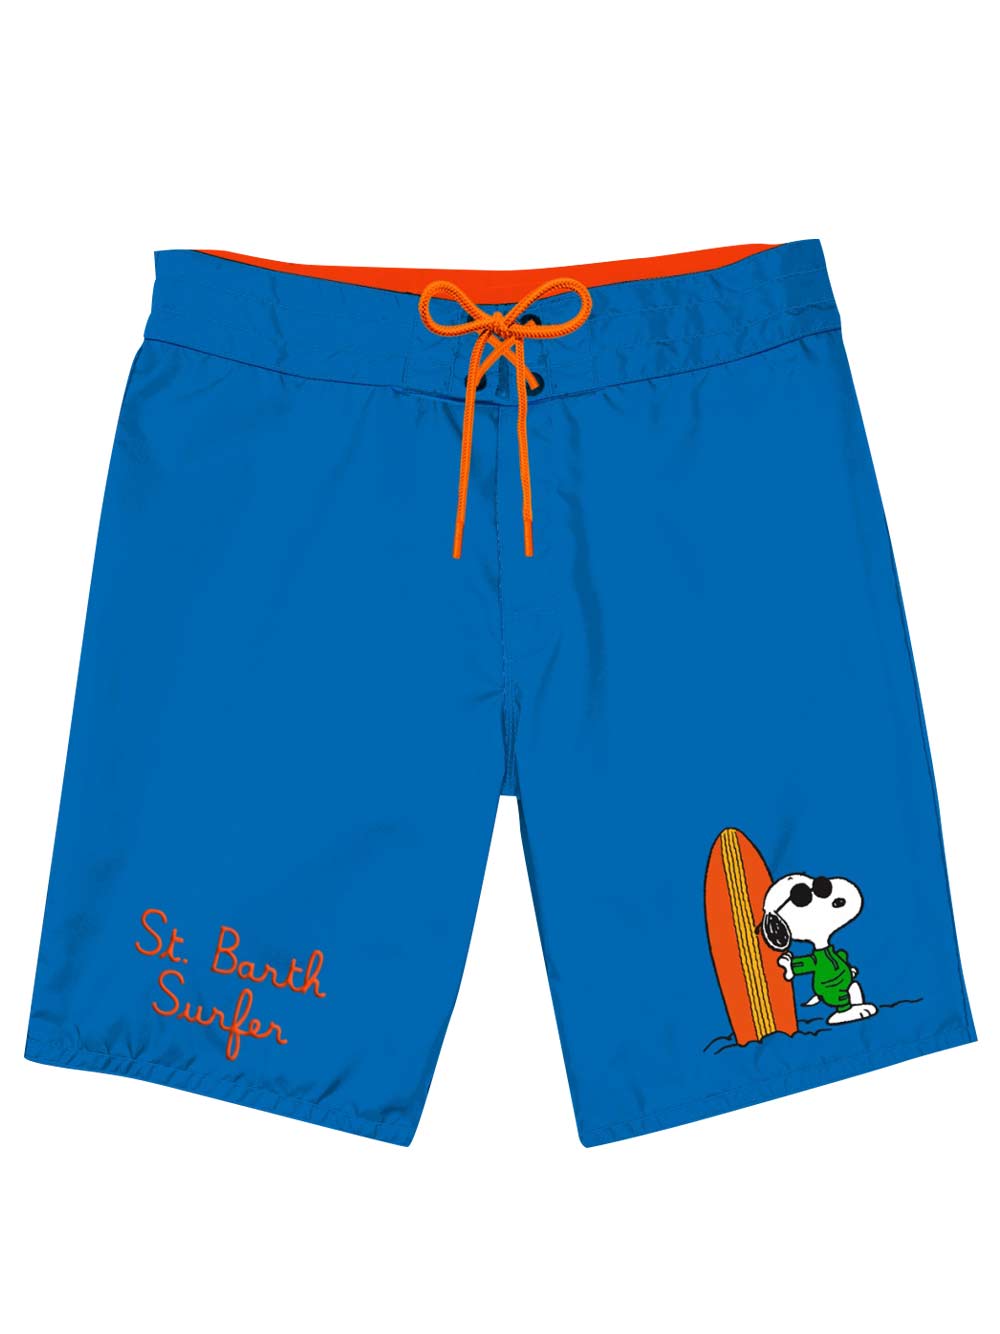 PREORDER: Snoopy Surfer Shorts